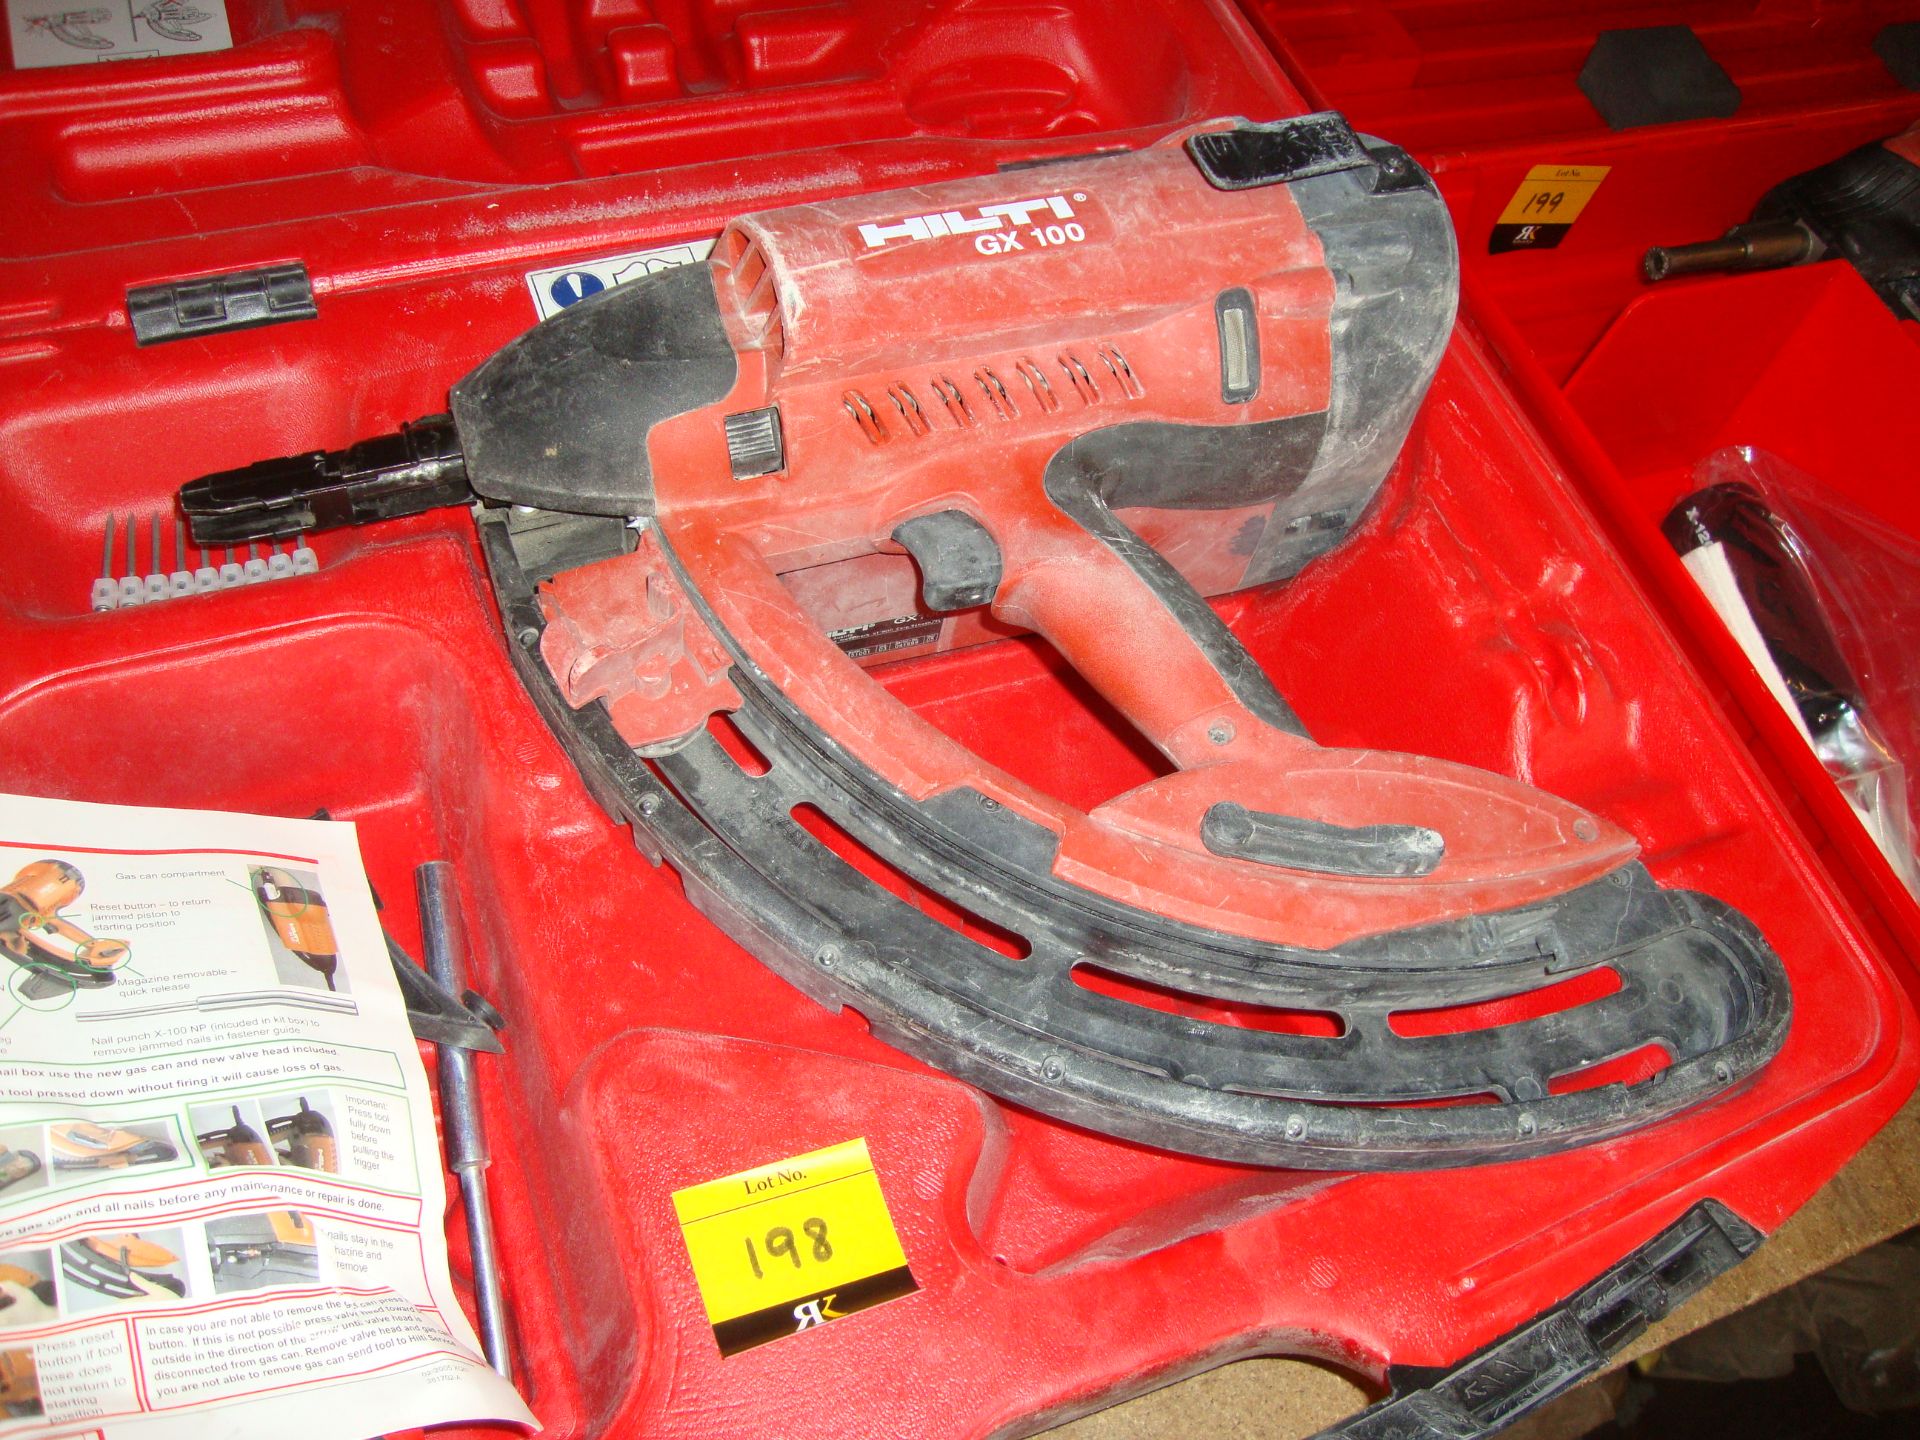 Hilti GX100 nail gun, including case, book pack and other minor ancillary items as pictured - Image 2 of 4